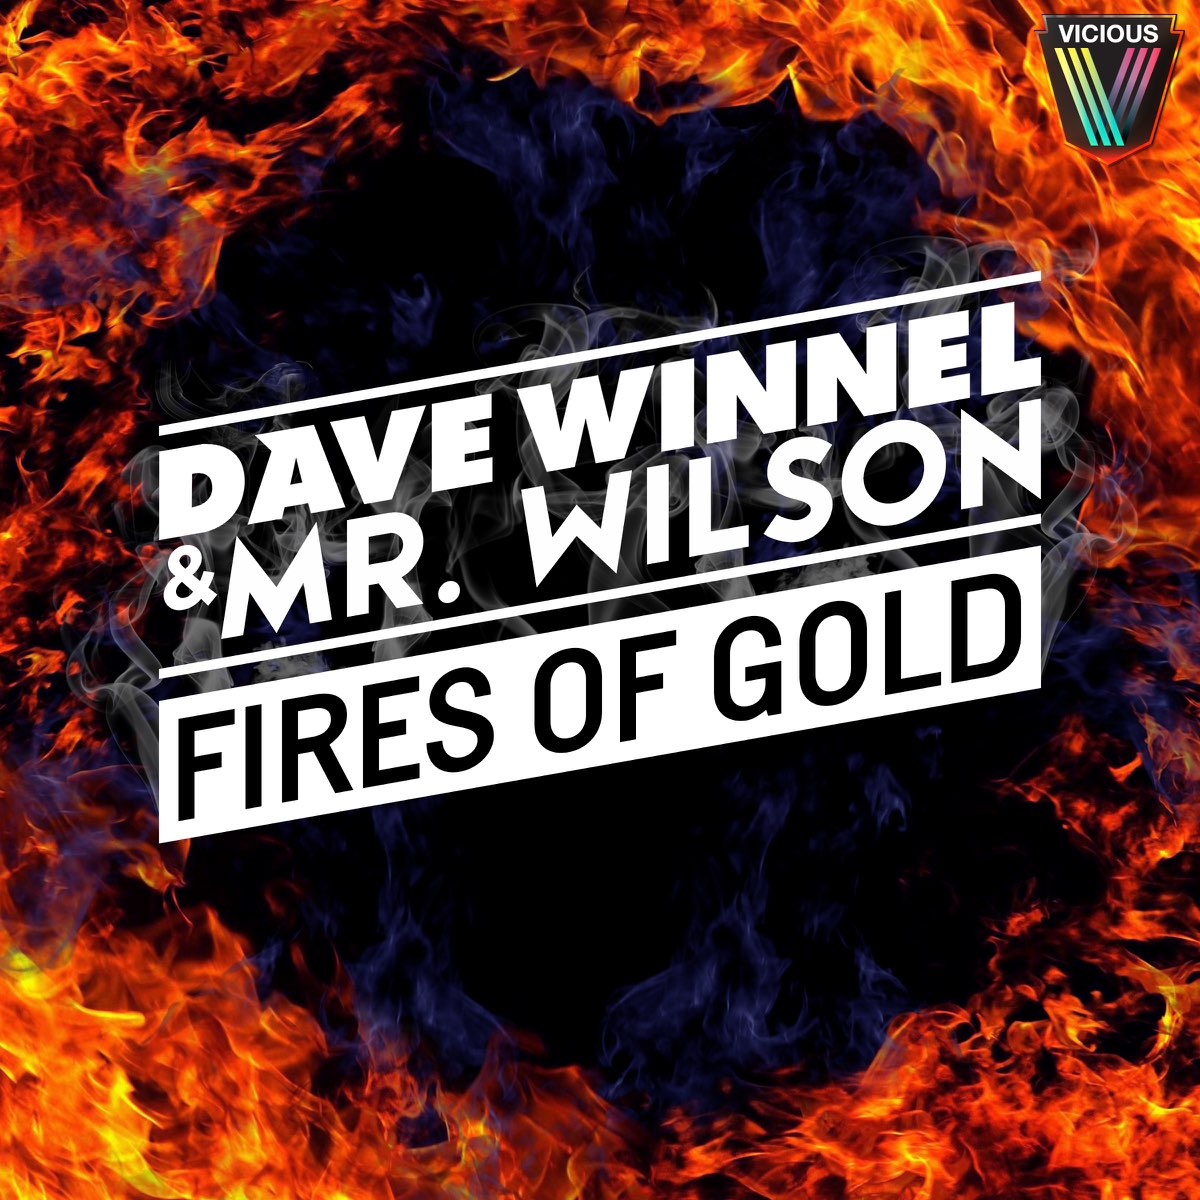 Fires of Gold - EP by Dave Winnel & Mr. Wilson on Apple Music